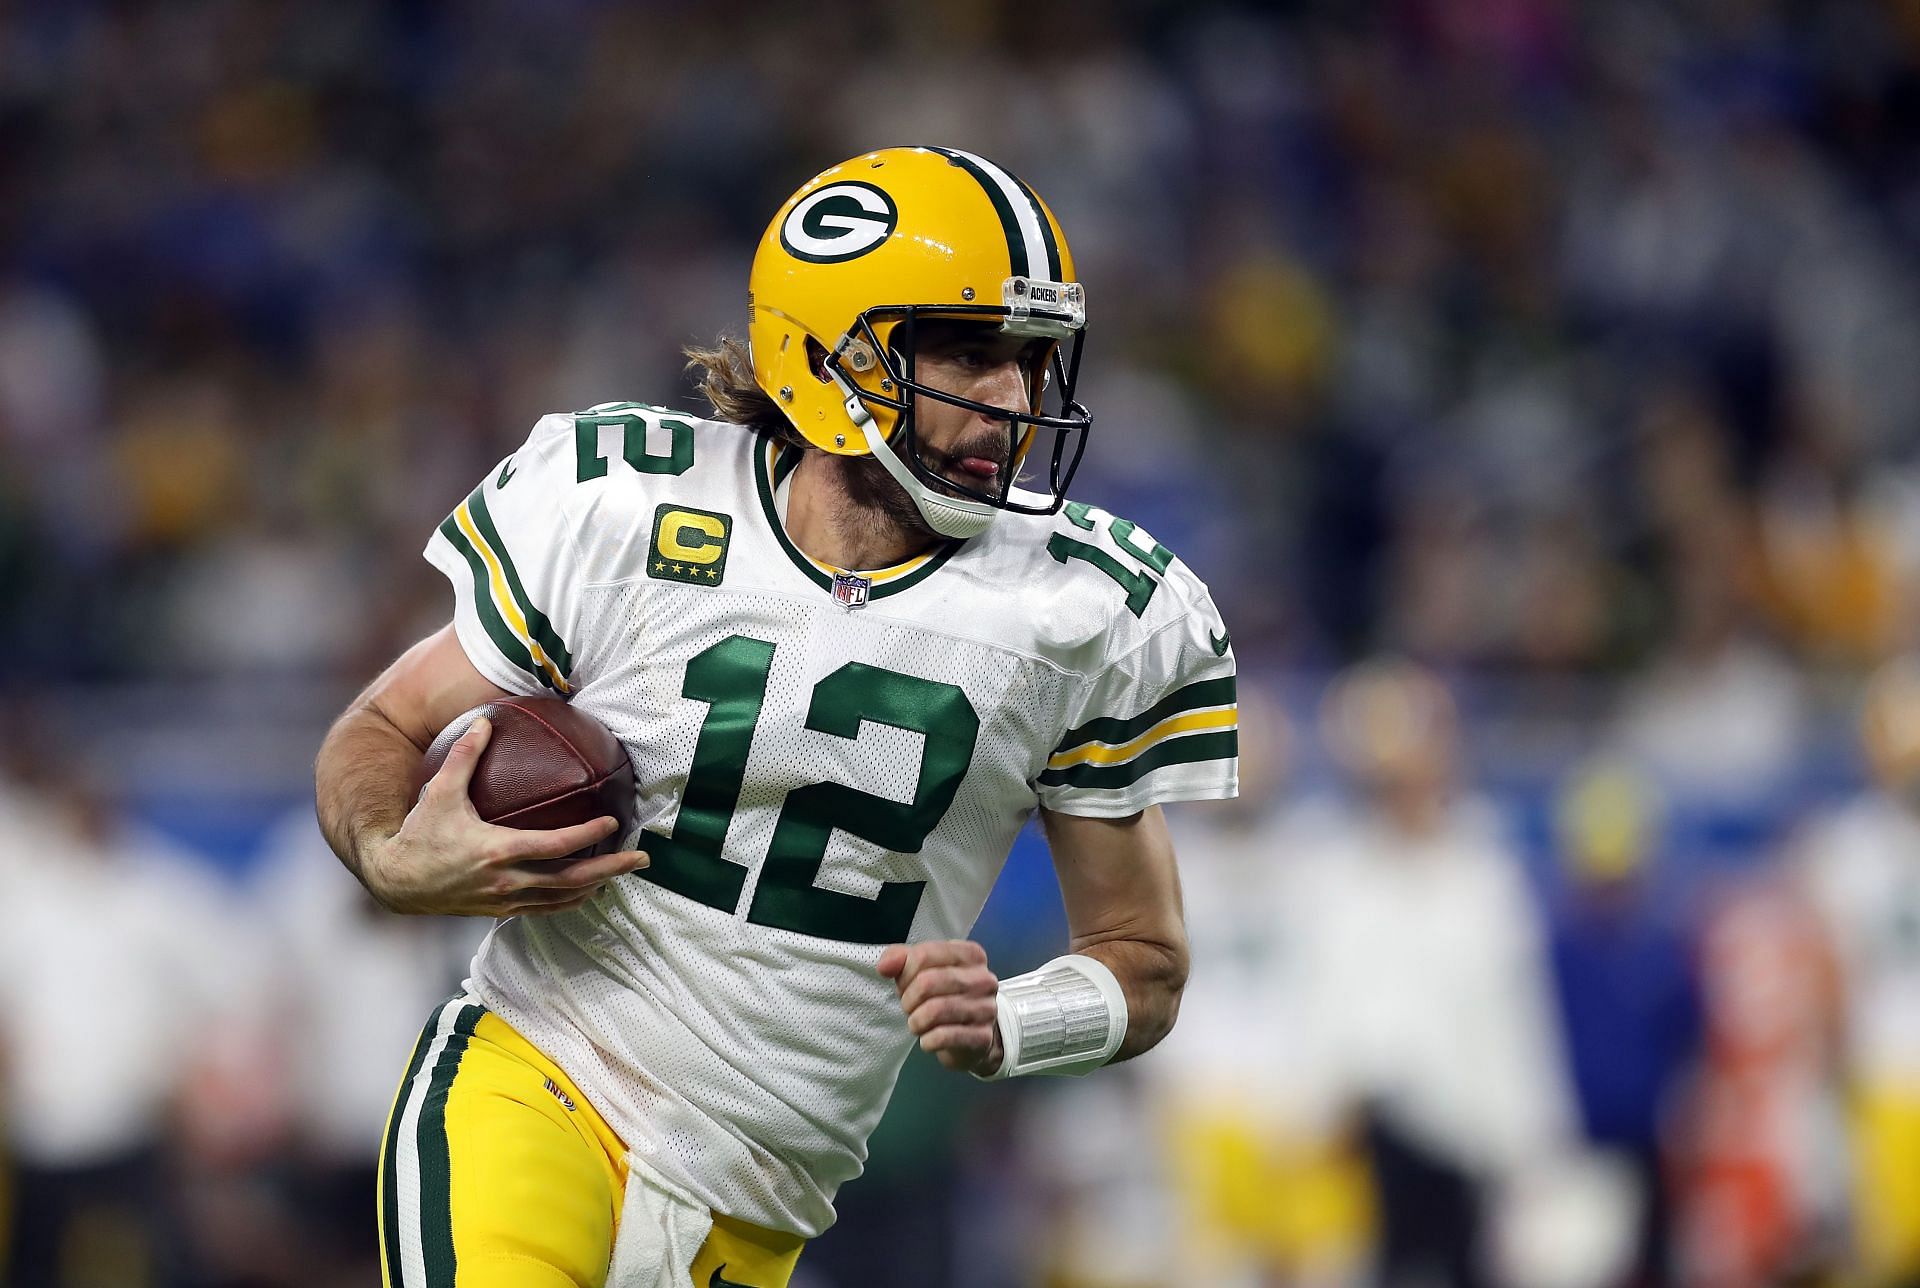 Rodgers against the Detroit Lions in week 17